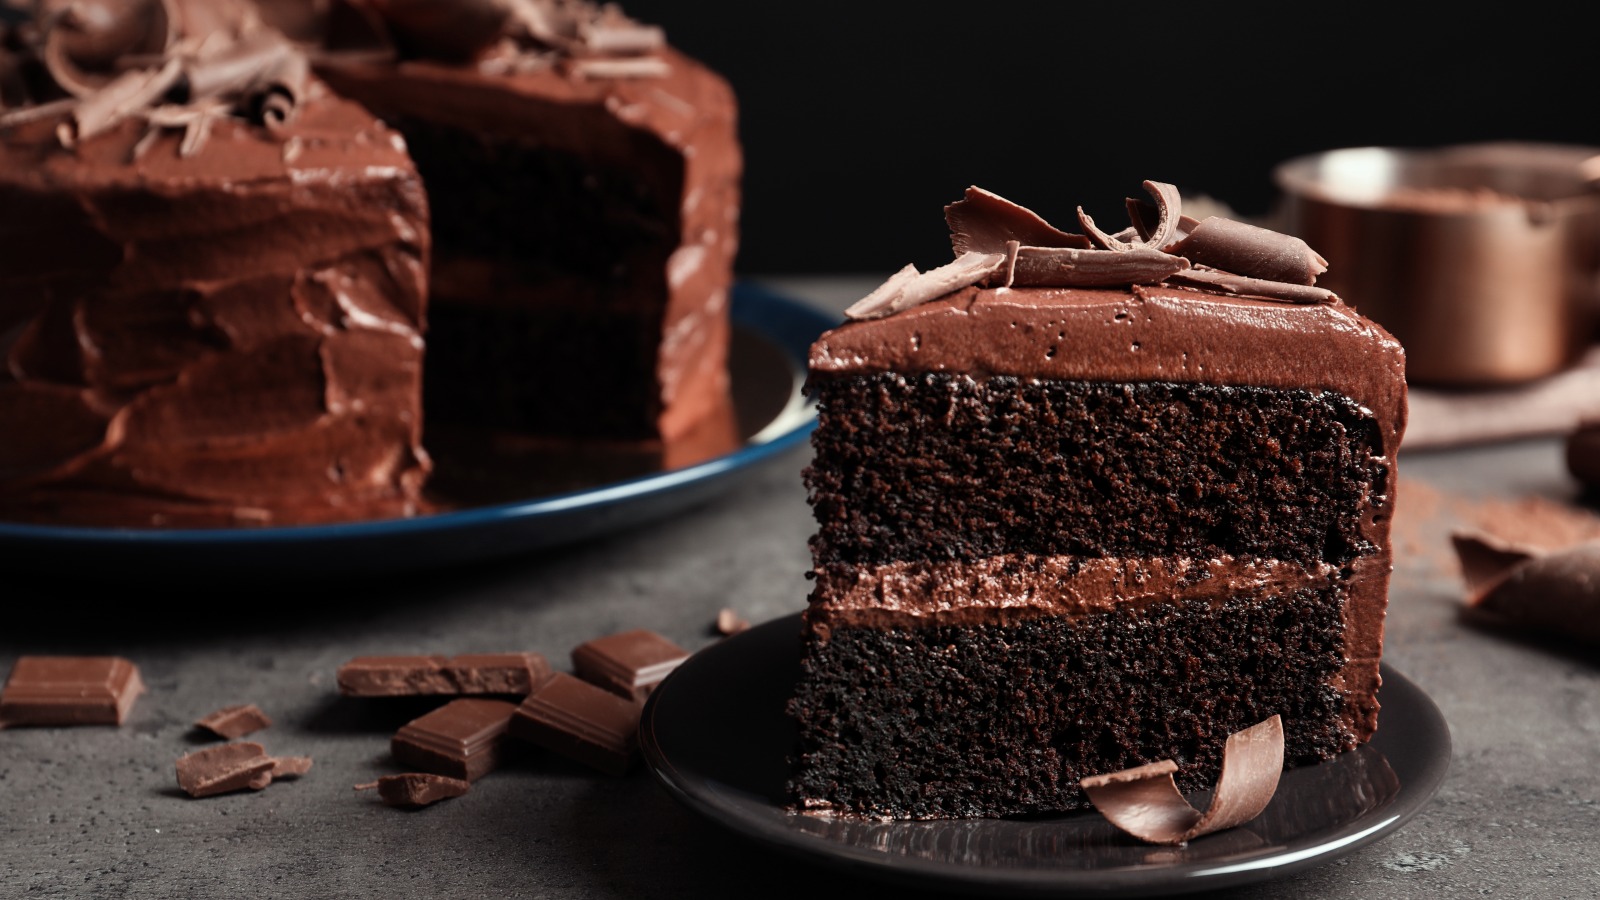 Boxed Chocolate Cake Mixes Ranked Worst To Best.